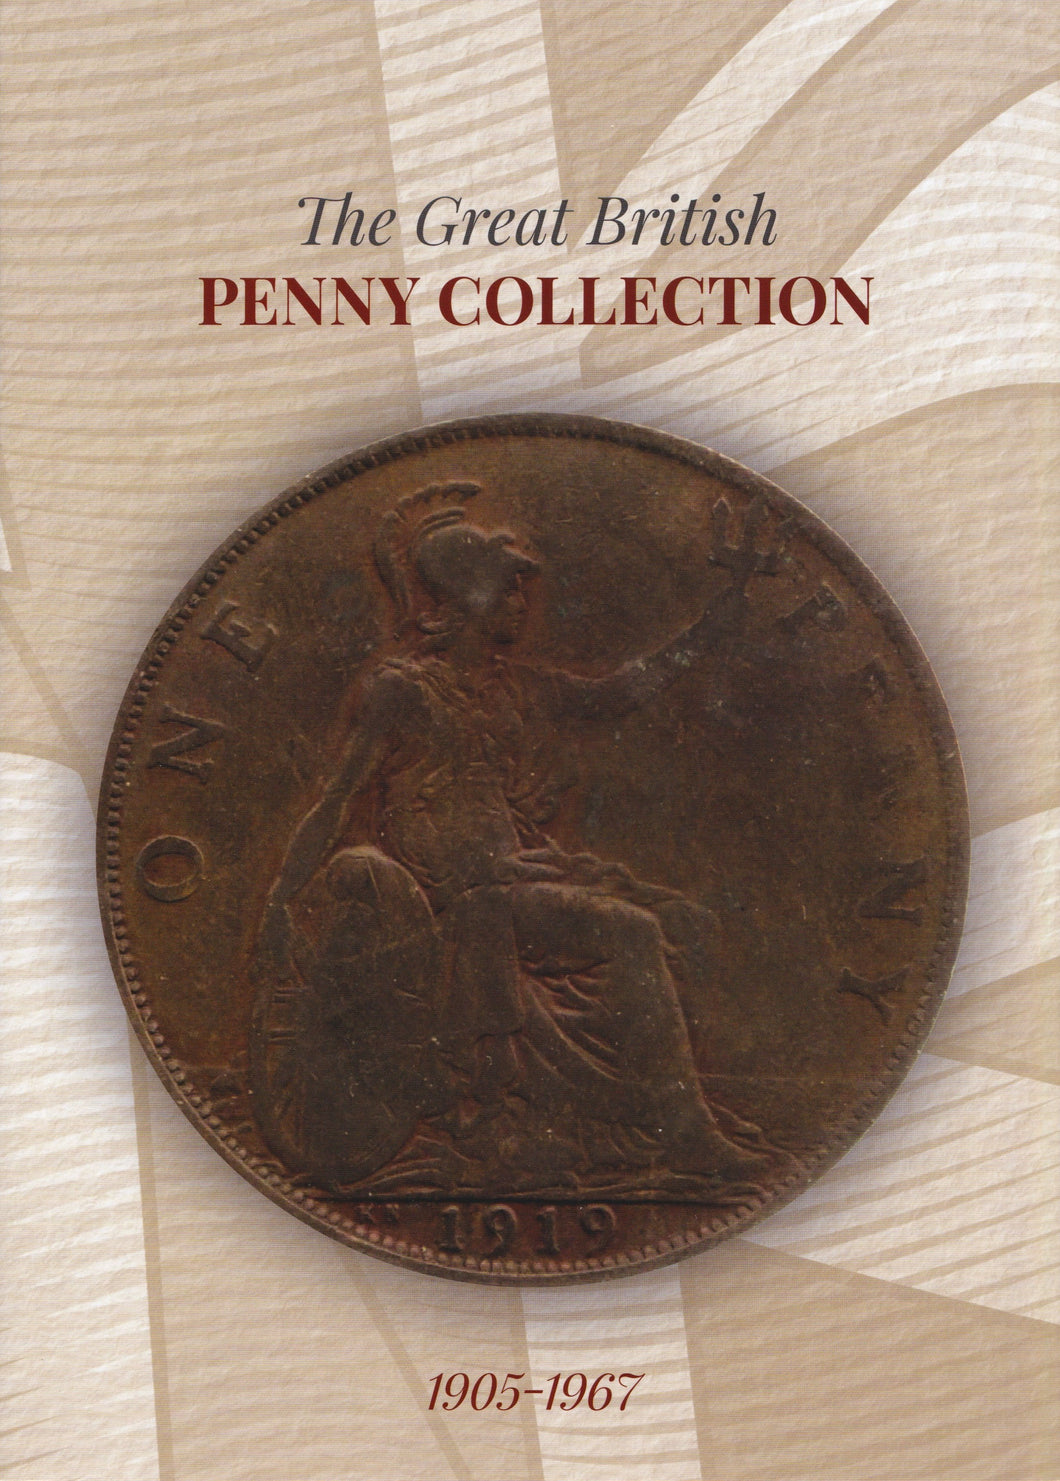 1905 - 1967 GREAT BRITISH PENNY COIN COLLECTION ALBUM STOCKING FILLER GIFT - Coin Album - Cambridgeshire Coins